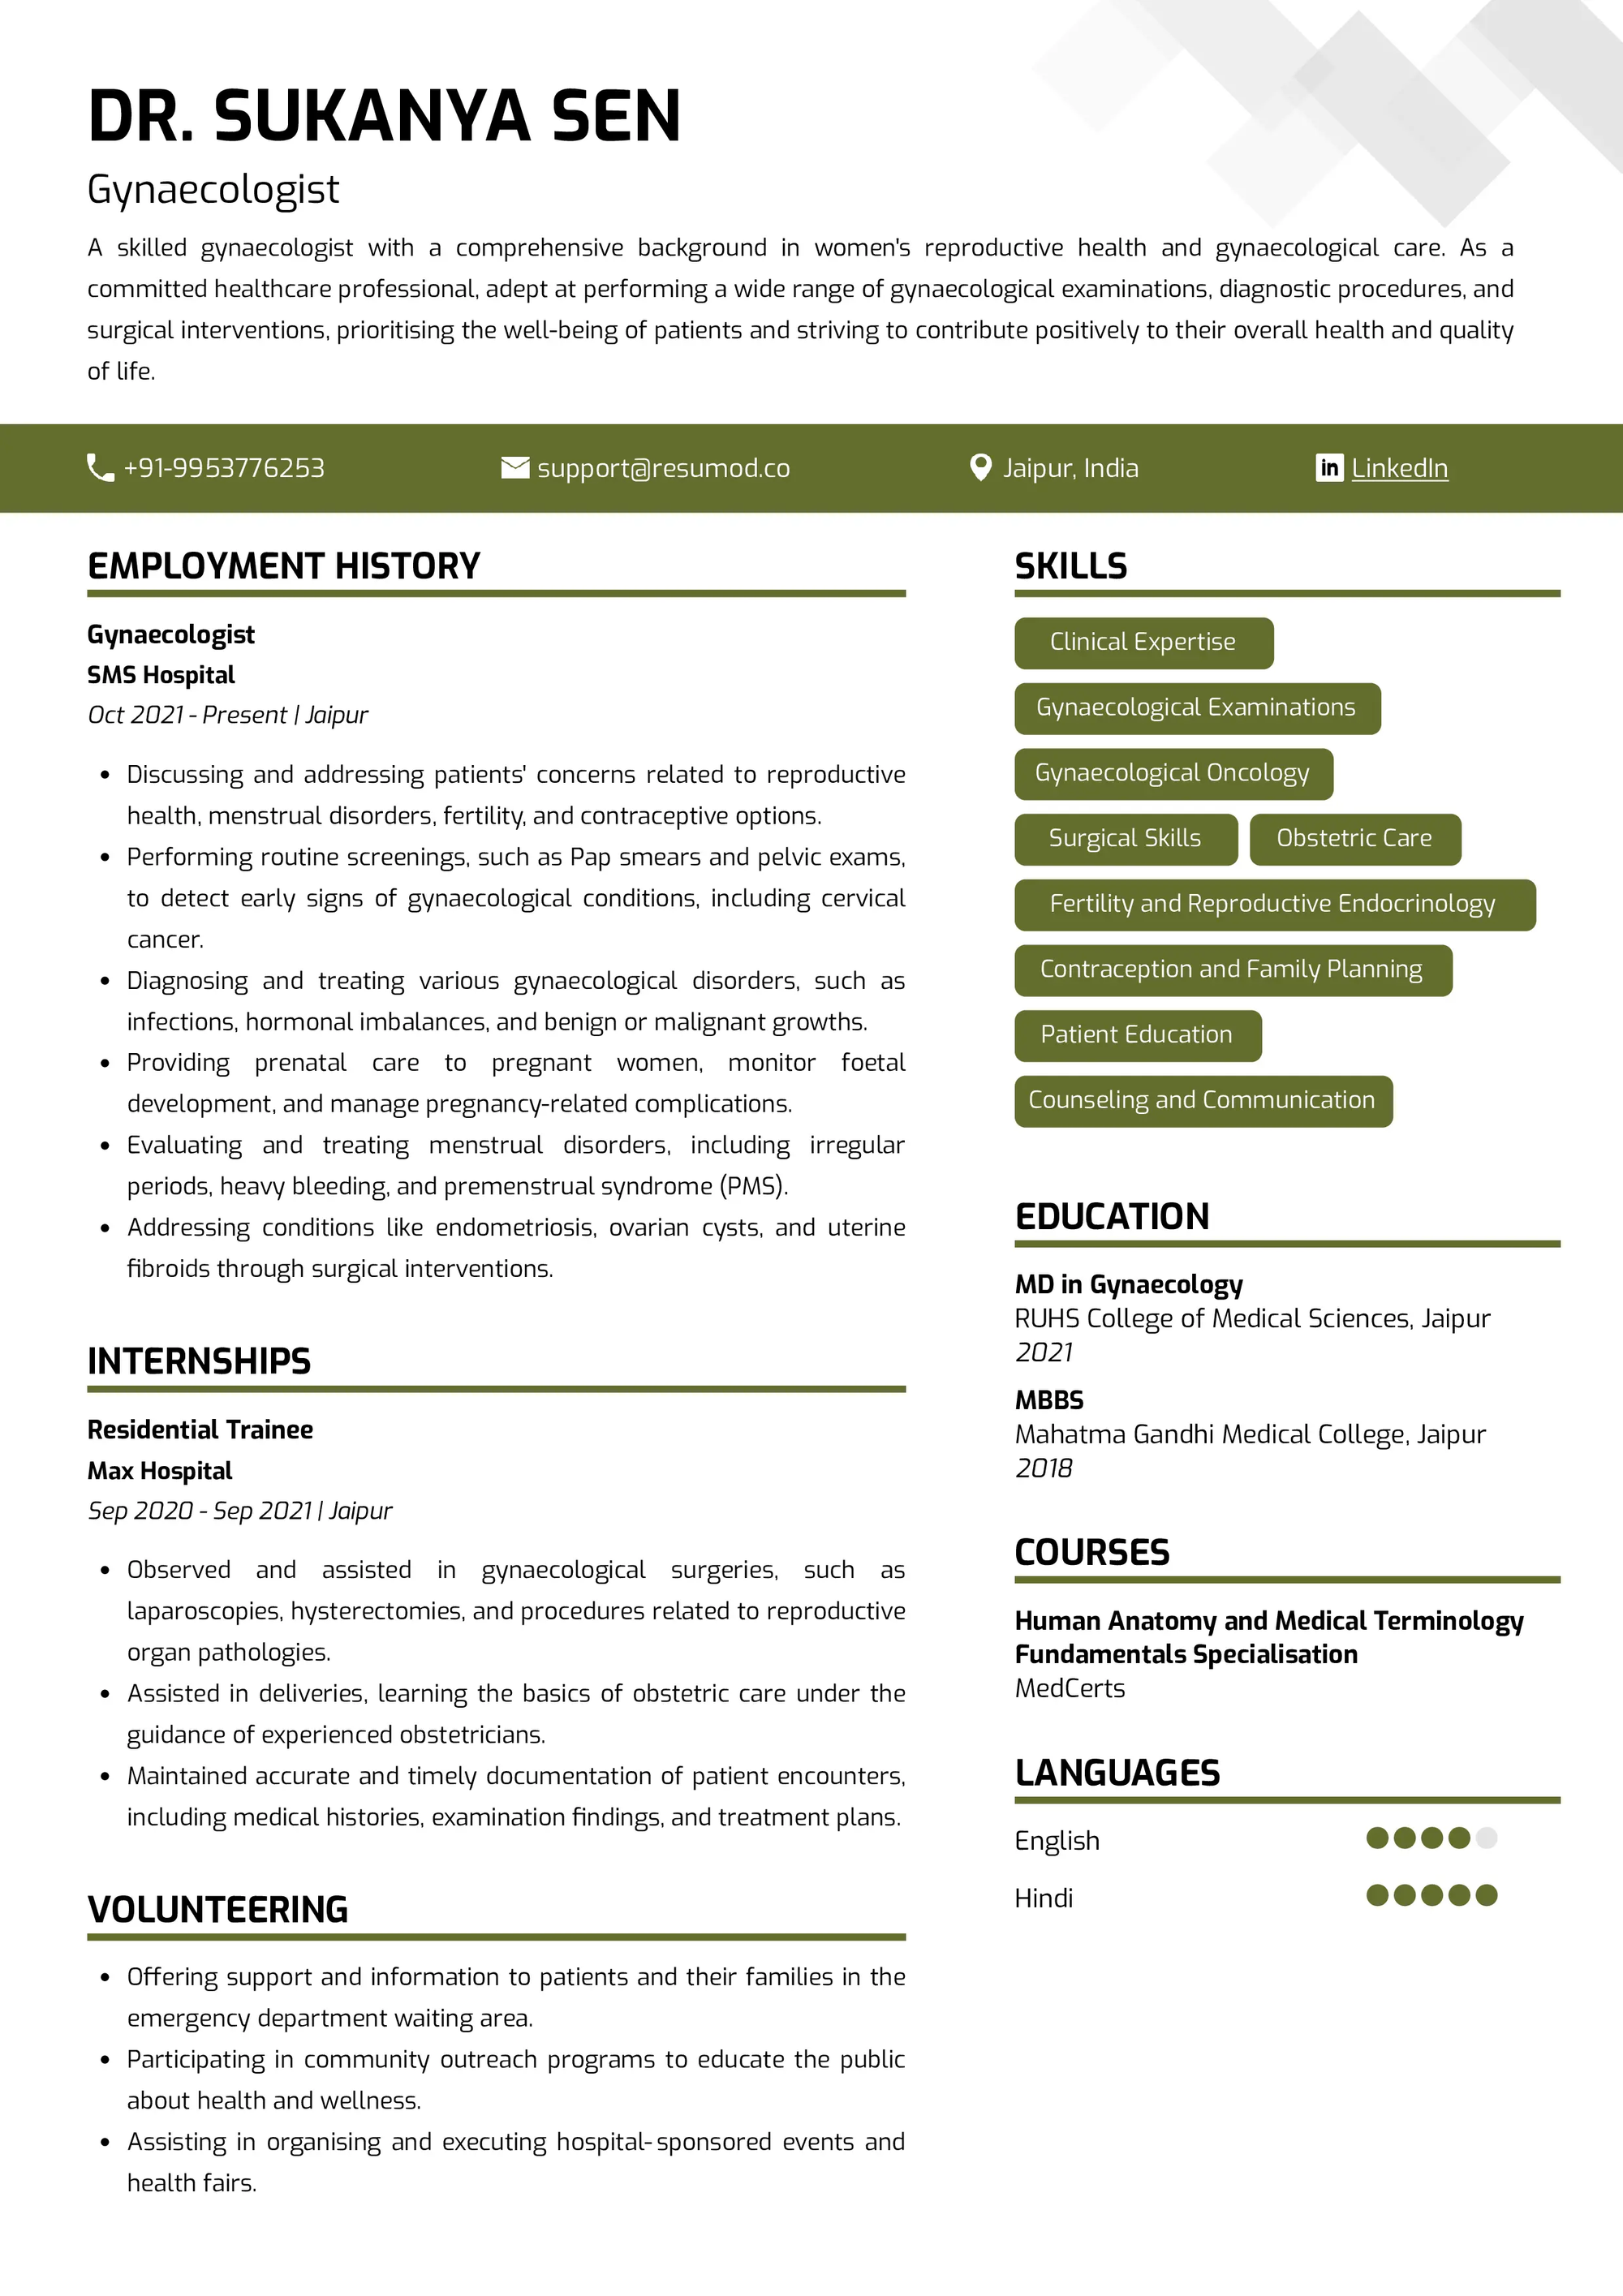 Resume of Gynaecologist built on Resumod